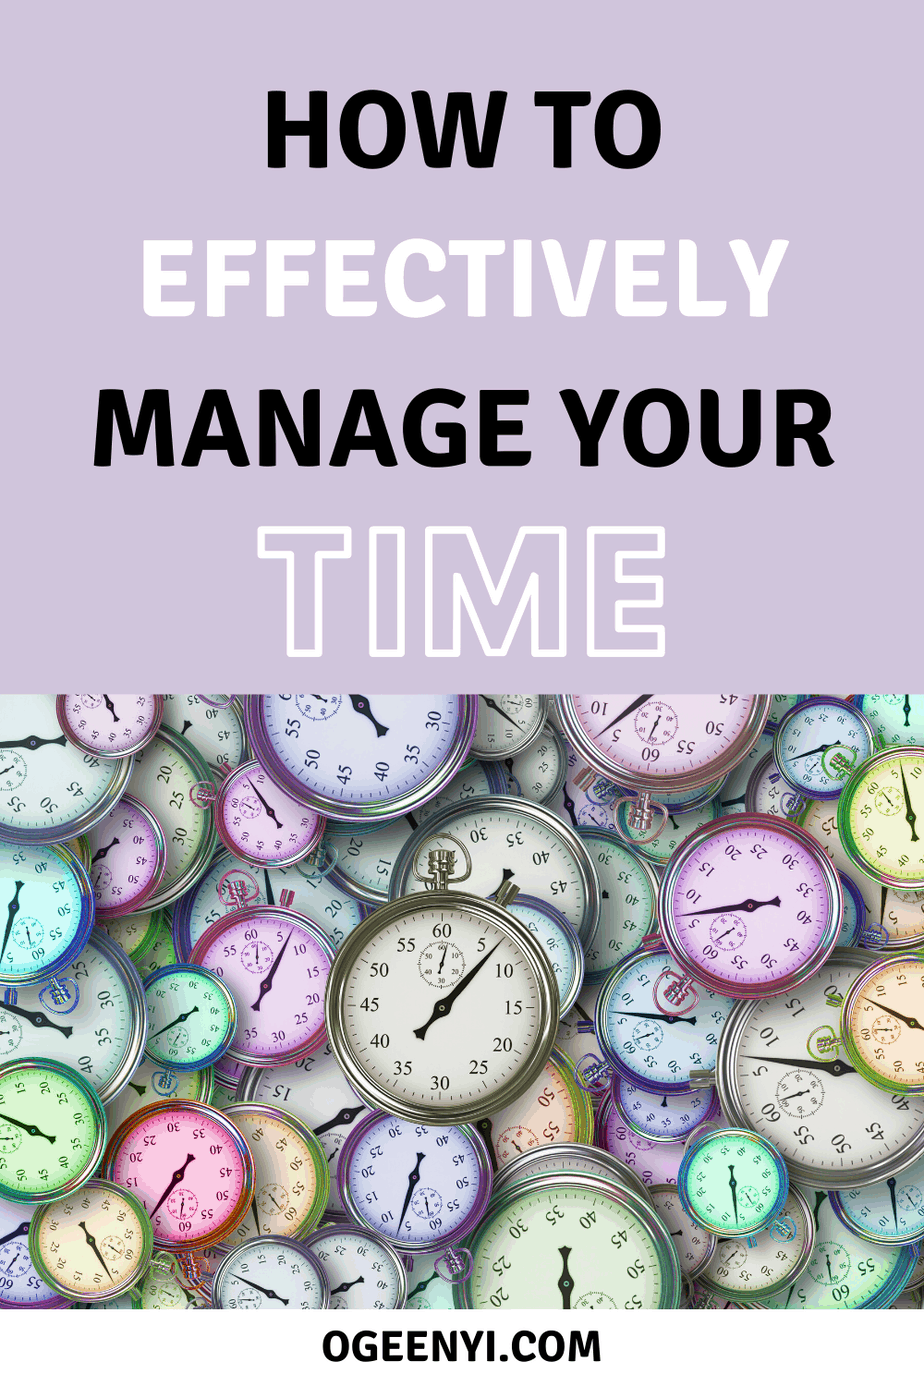 How To Manage Time - 10 Powerful Time Management Skills